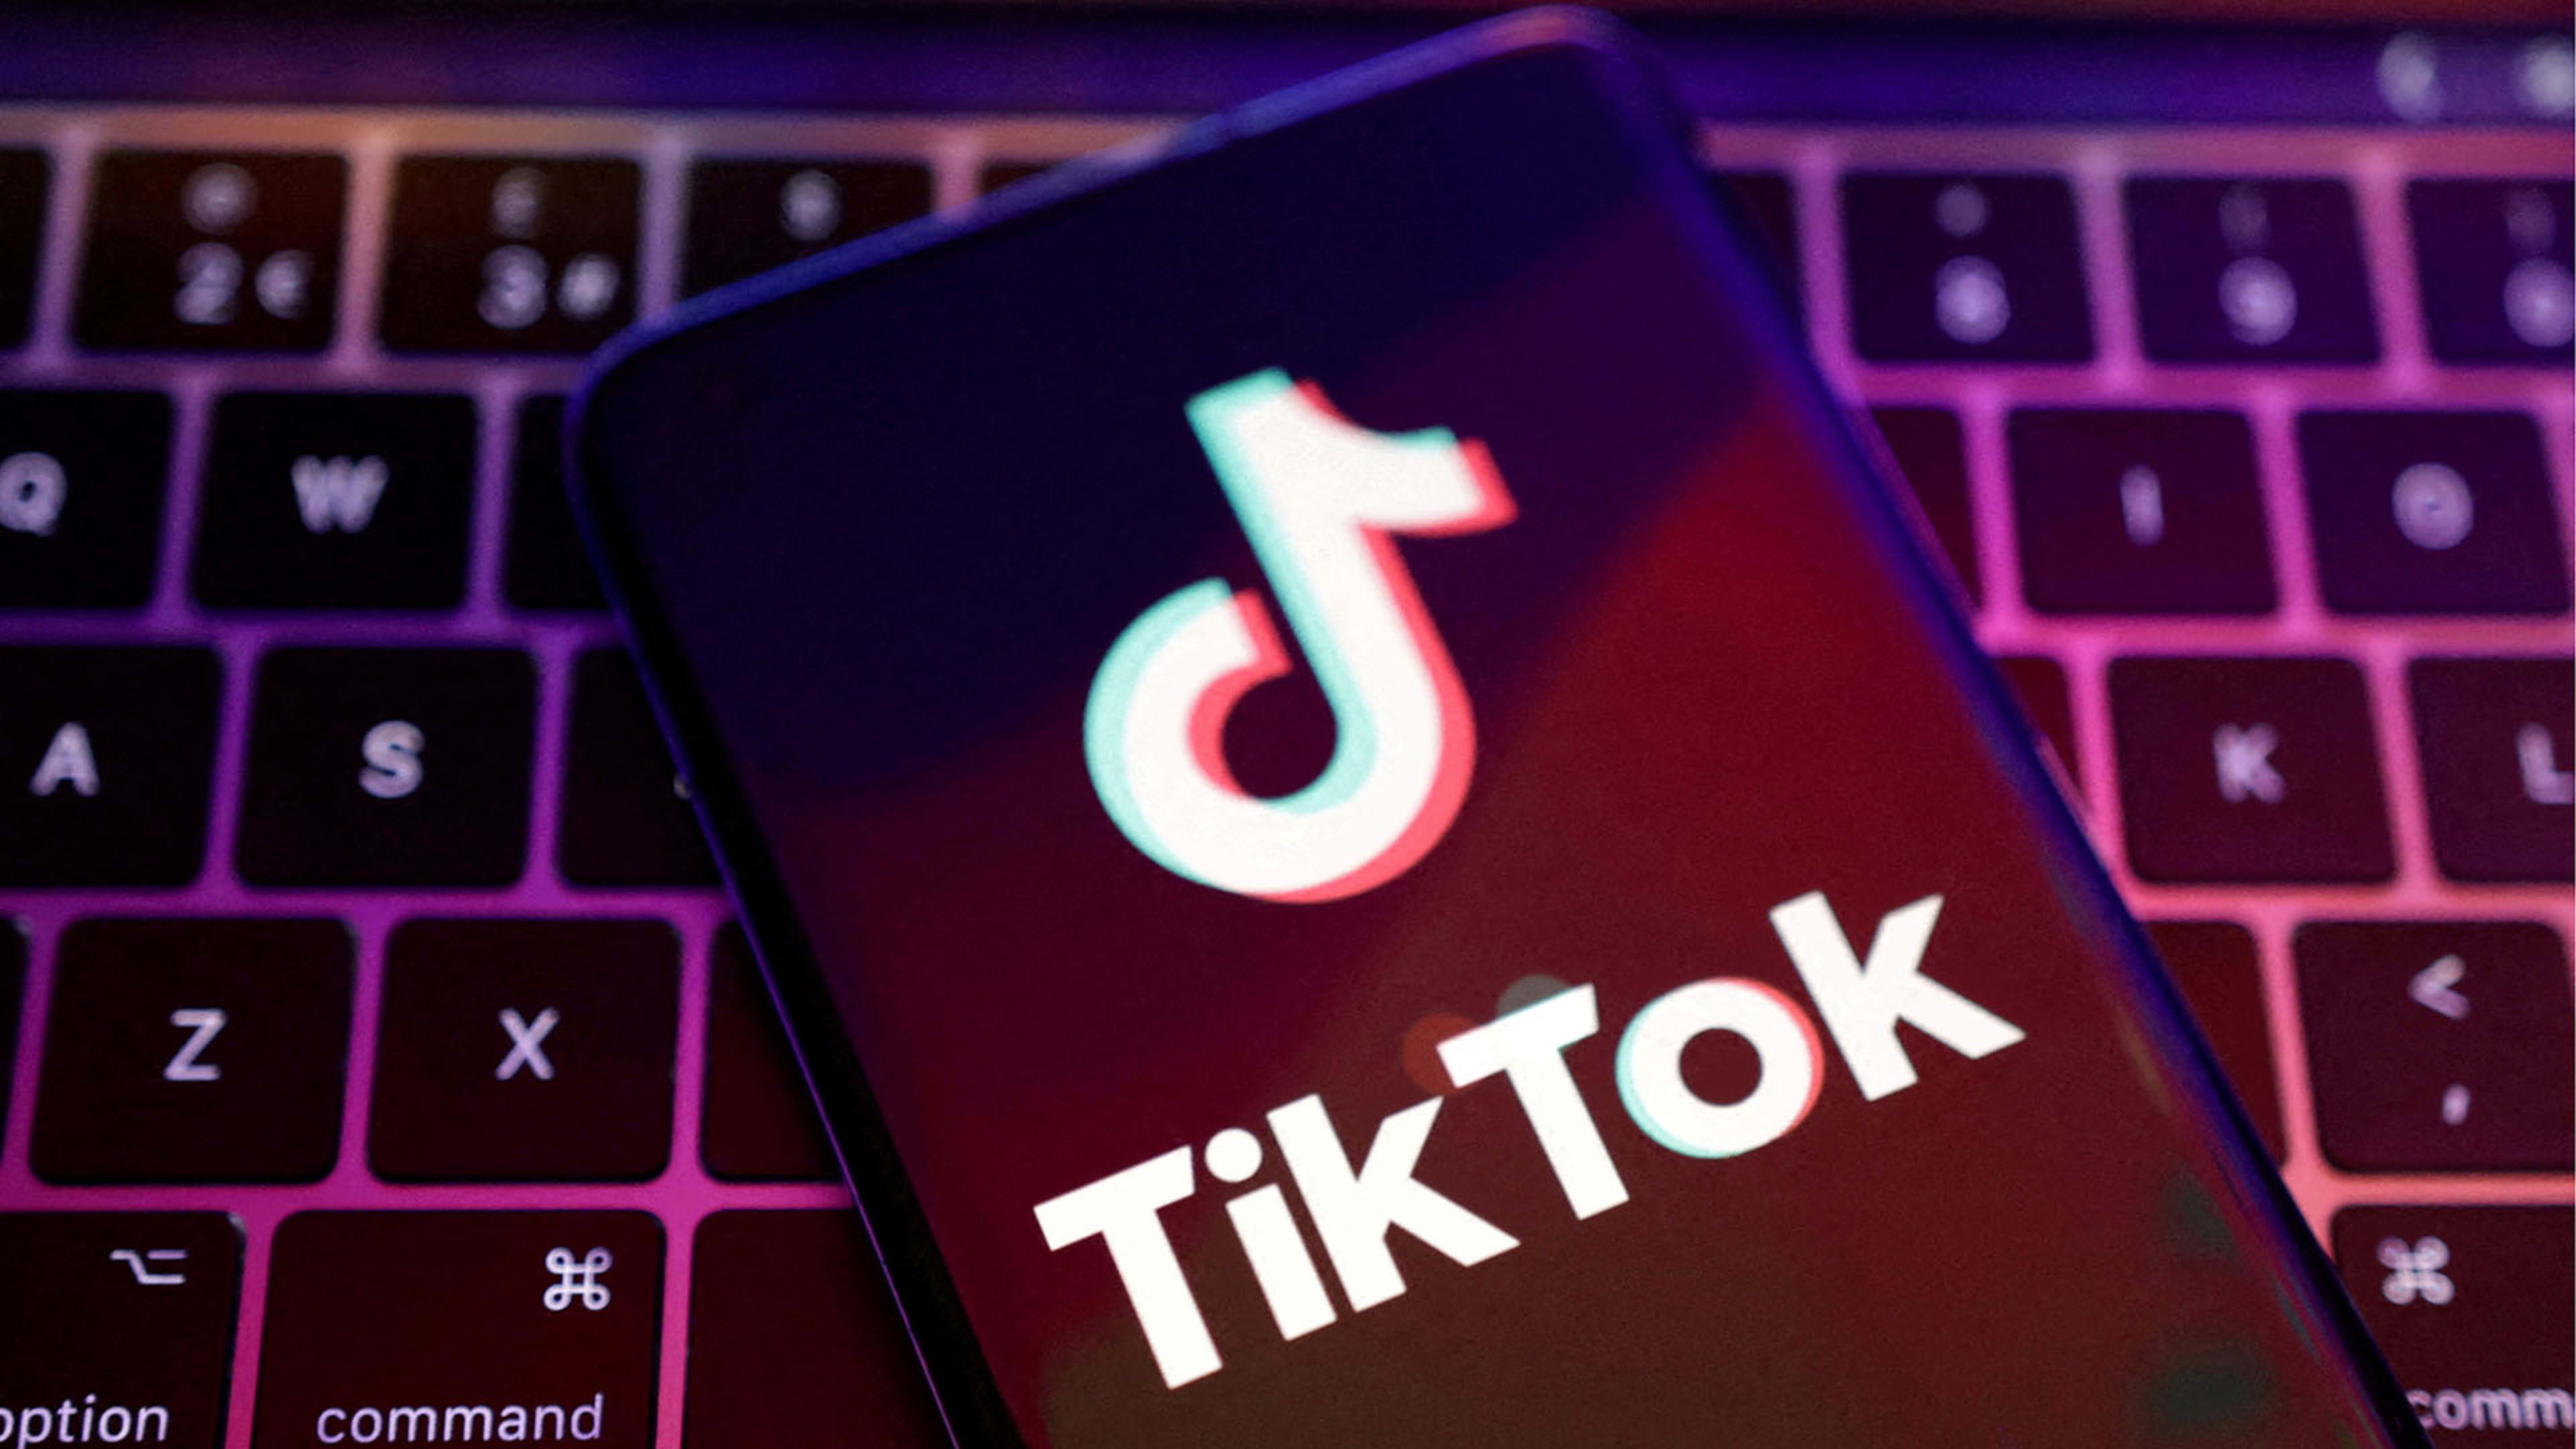 Congress to ByteDance: Divest from TikTok or get banned from app stores